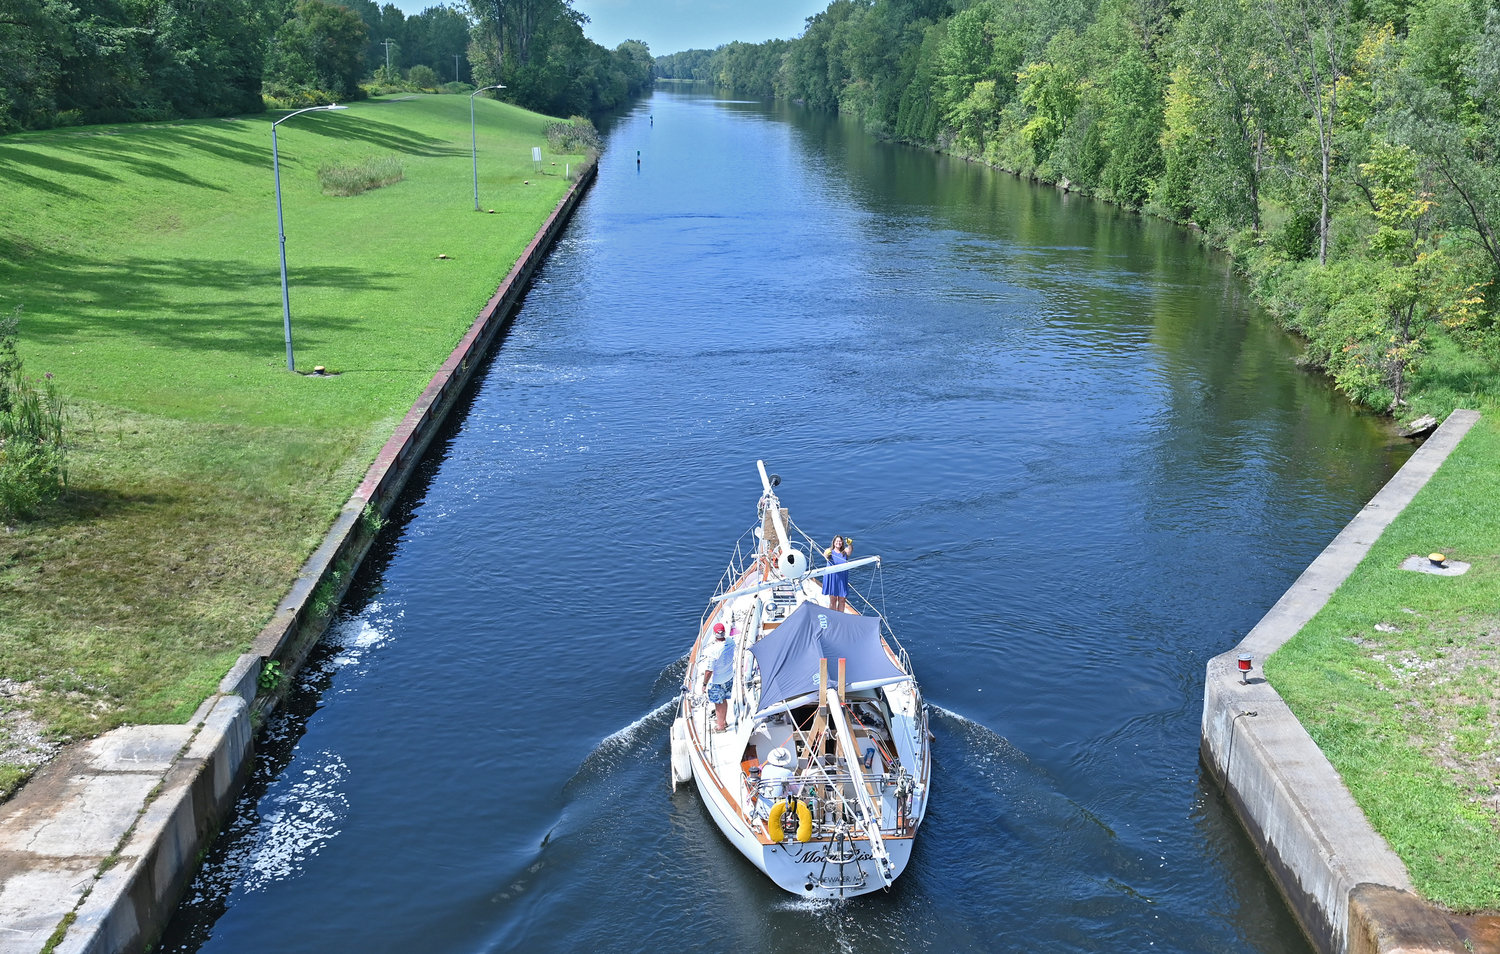 The Moon Rise goes west on the Erie Canal after clearing Lock 22 in New London Monday, Aug. 29. The couple, from Maryland, are heading to Toronto, Canada.